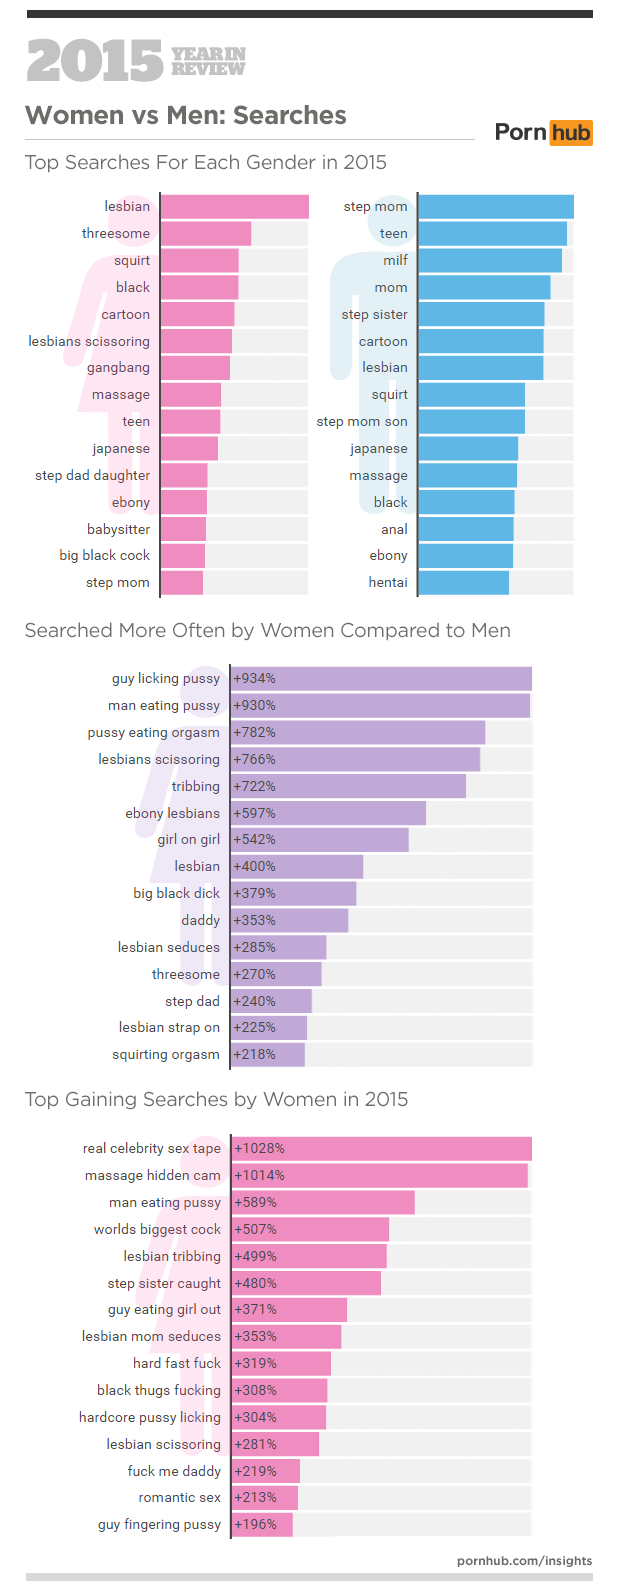 4-pornhub-insights-2015-year-in-review-female-male-searches